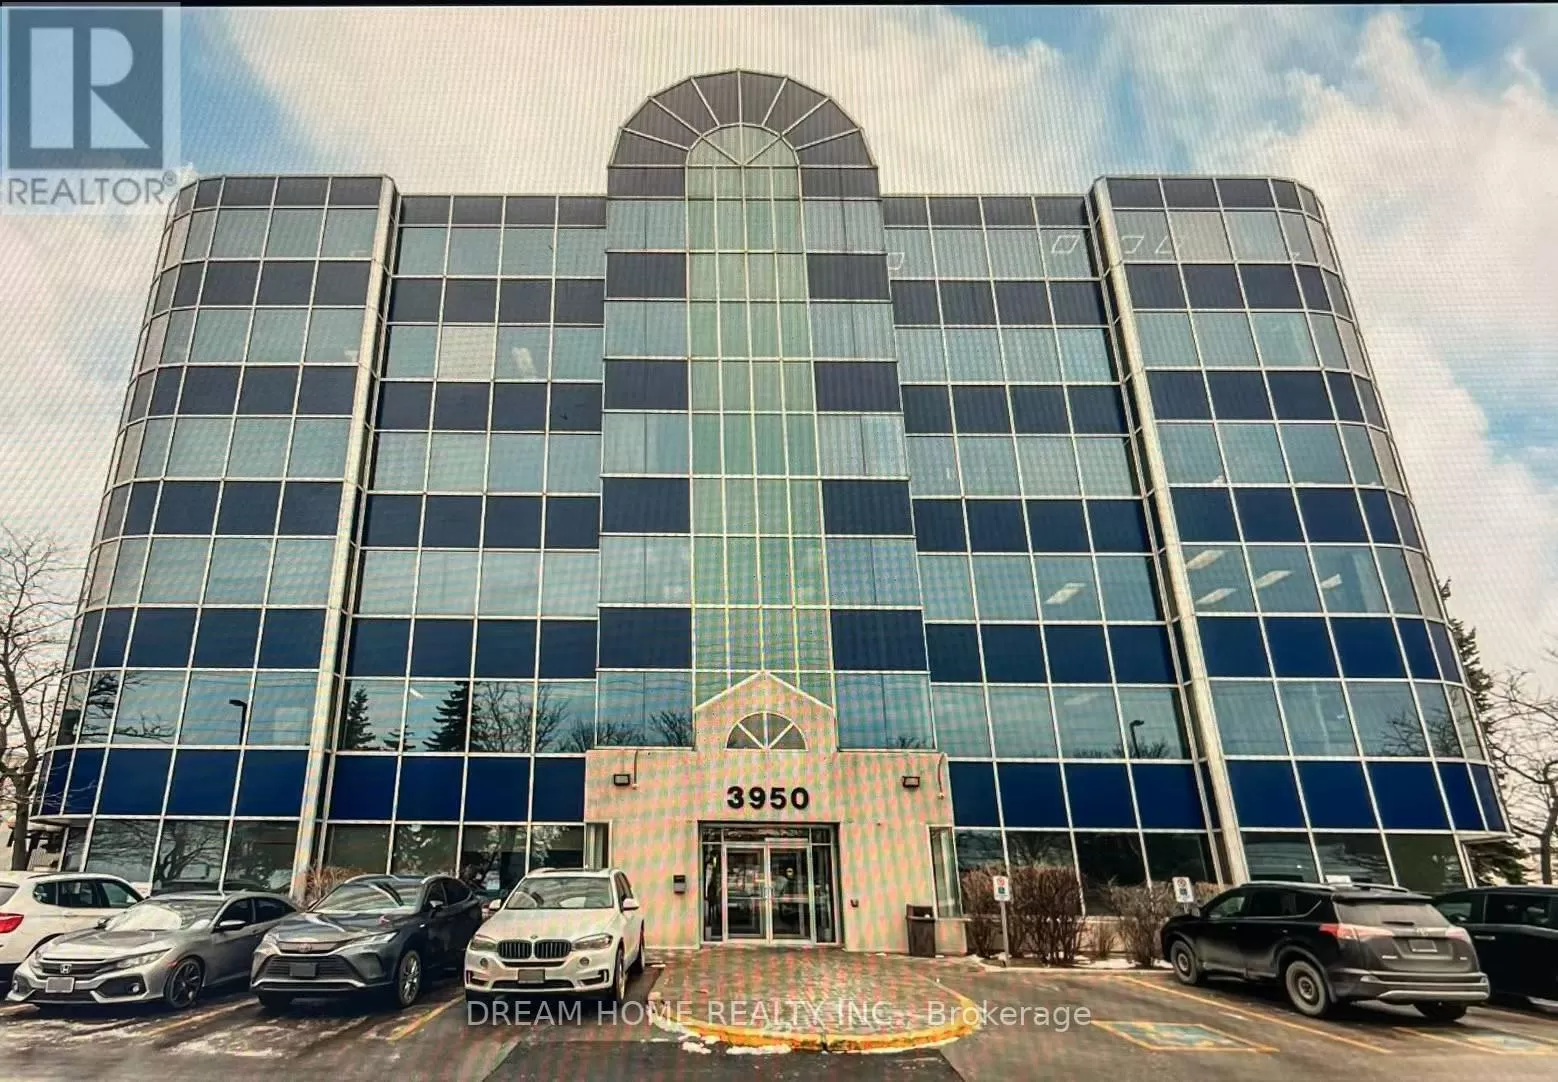 Offices for rent: 604 - 3950 14th Avenue, Markham, Ontario L3R 0A9